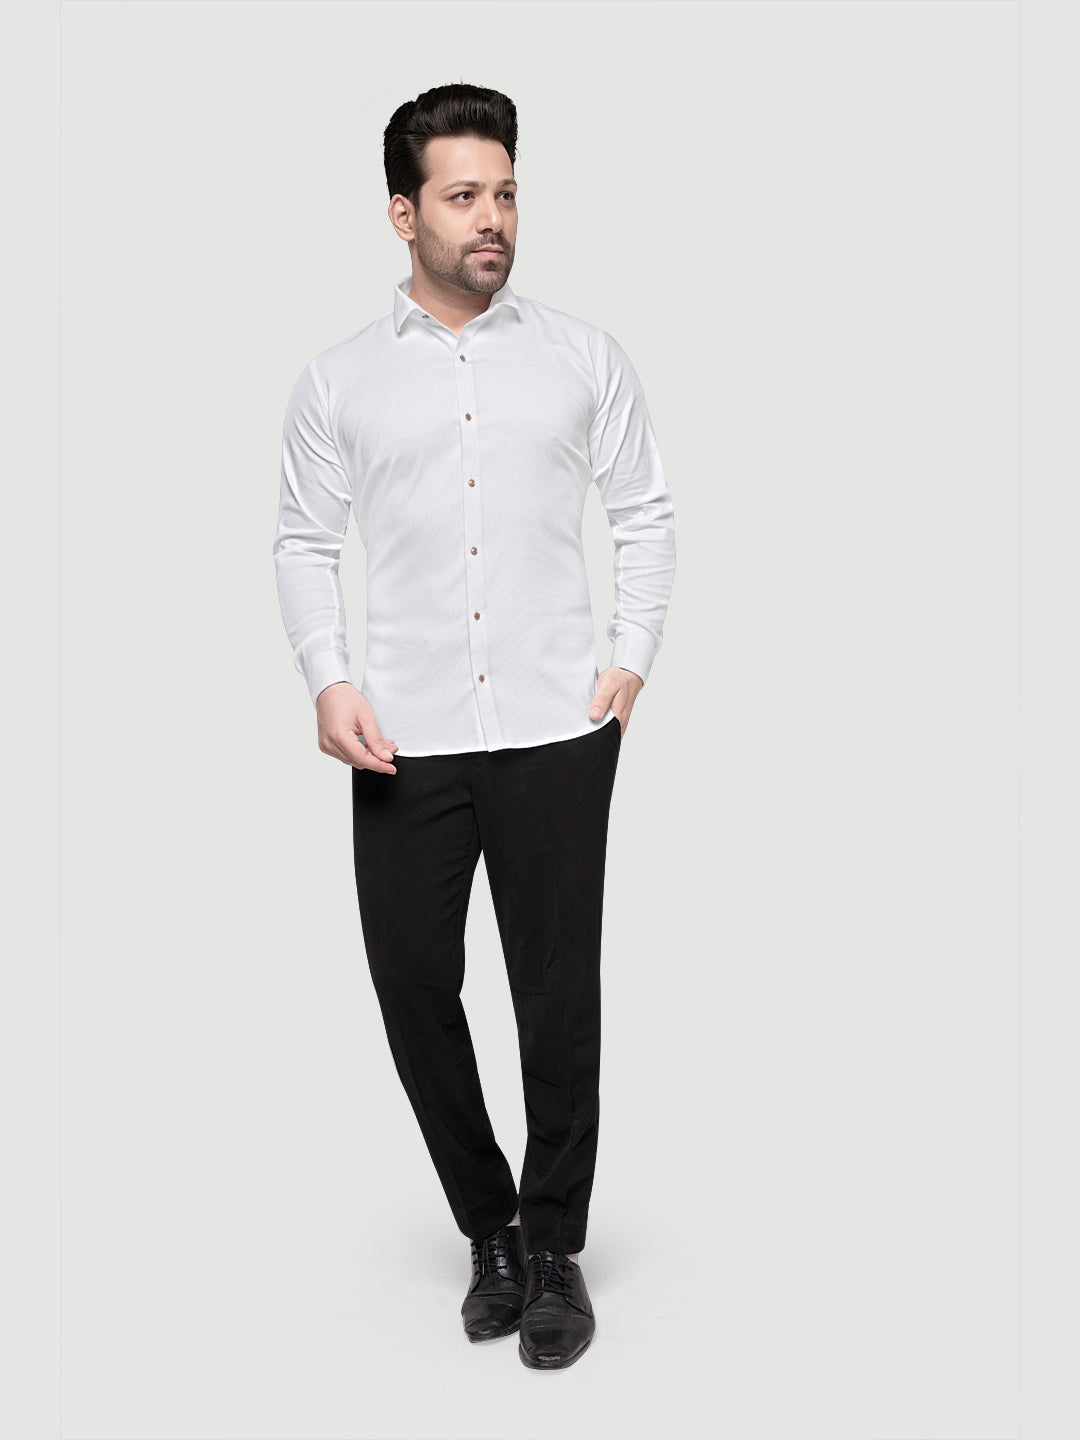 Black and White Men's Designer Shirt with Collar Accessory & Broach White